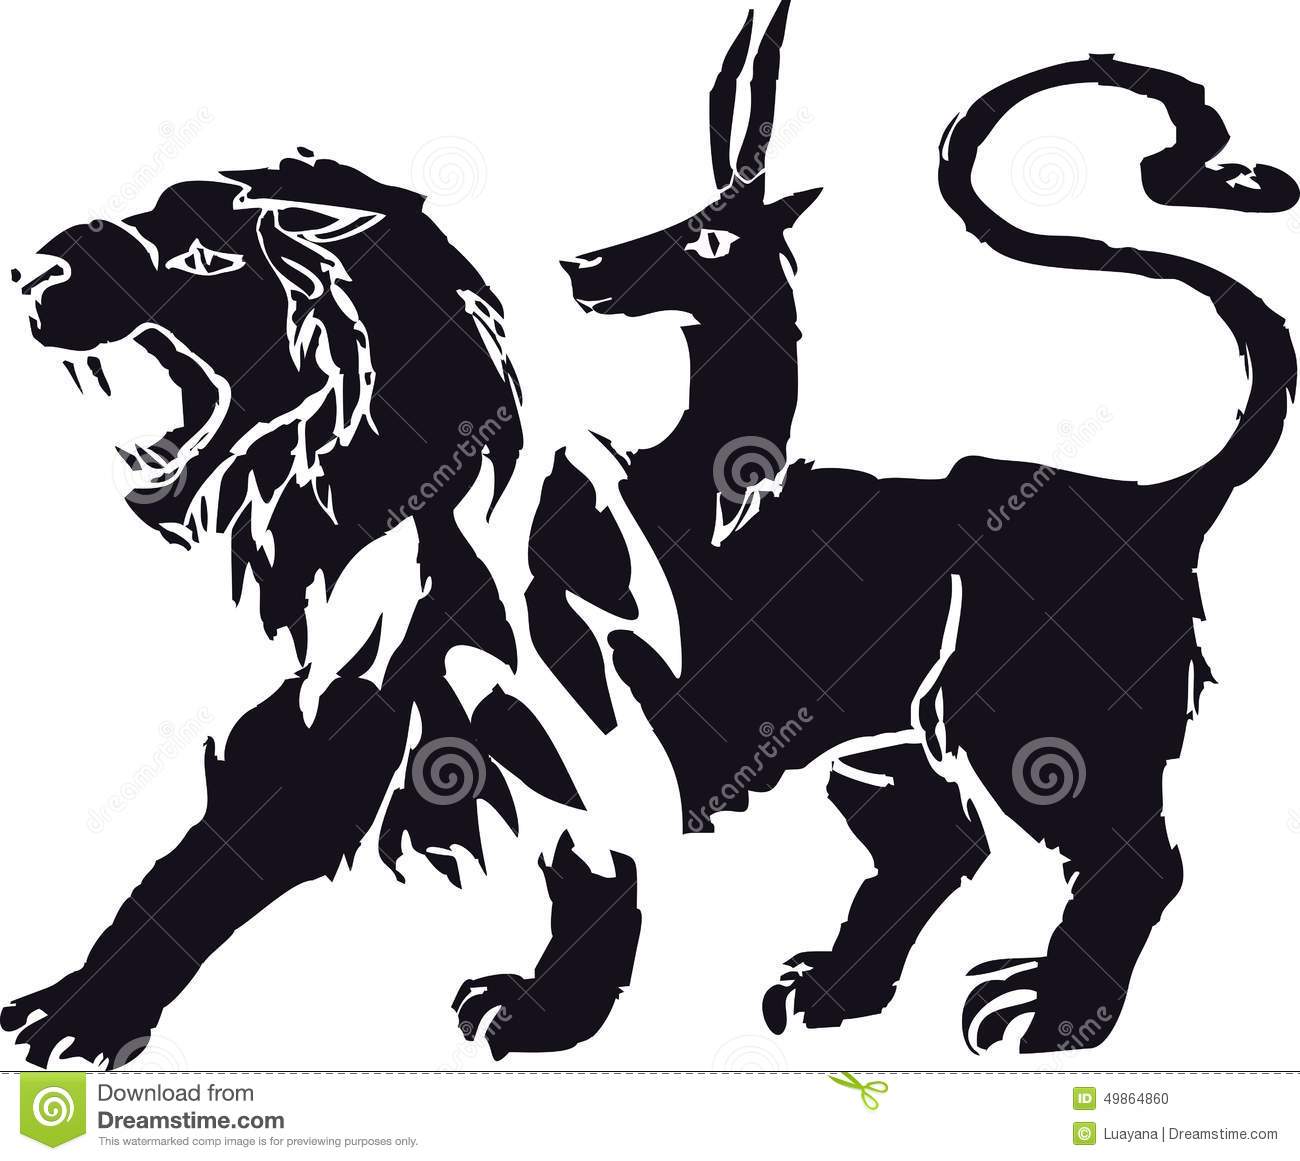 Chimera clipart #11, Download drawings